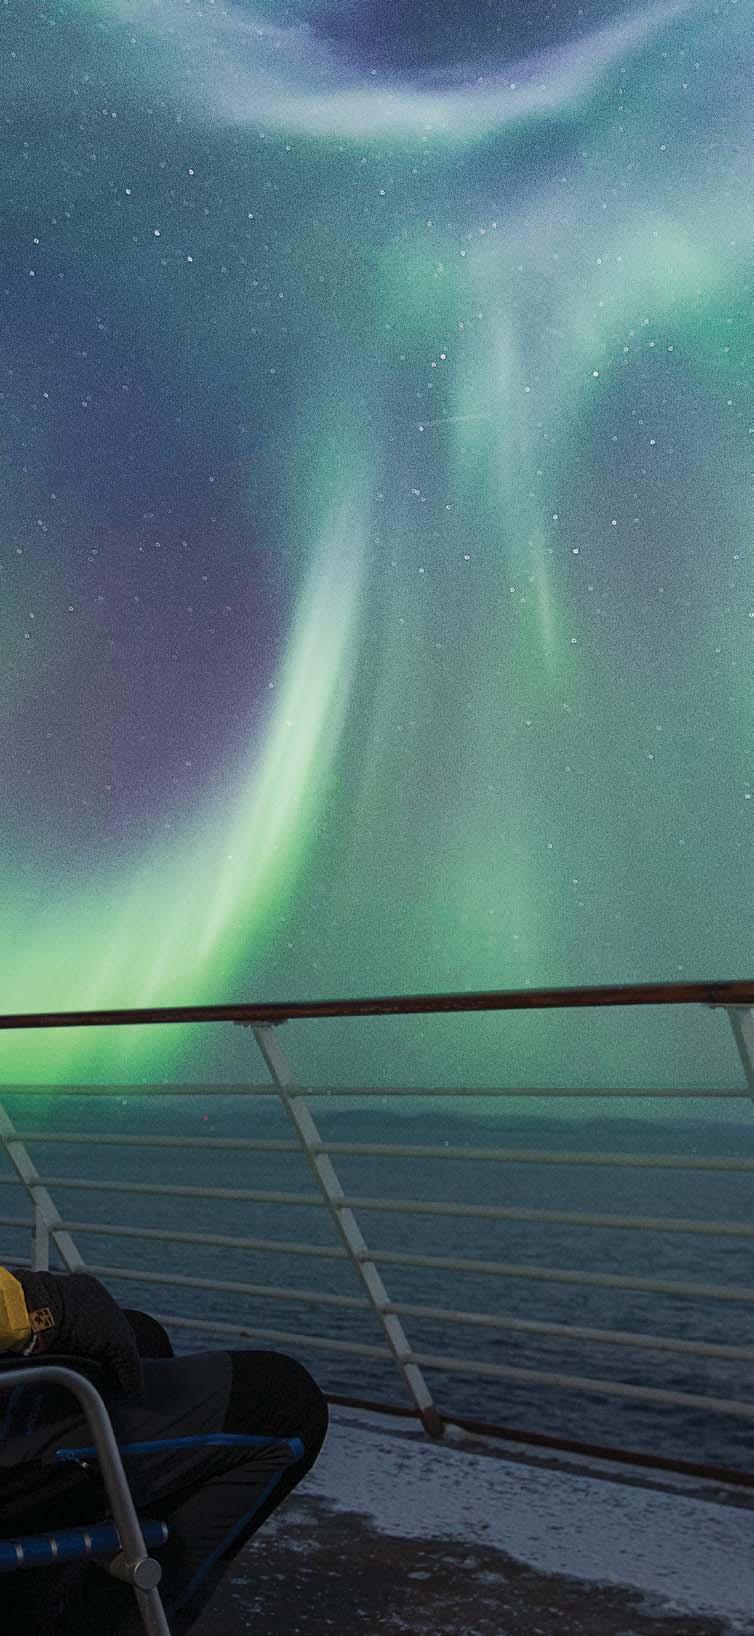 Contents WHY NORWAY 4 why Hurtigruten 6 sustainability 8 THE FOUR SEASONS IN NORWAY 10 our classic cruises 20 Astronomy Cruise 26 Northern Lights Promise 28 Hurtigruten day by day and excursions 32